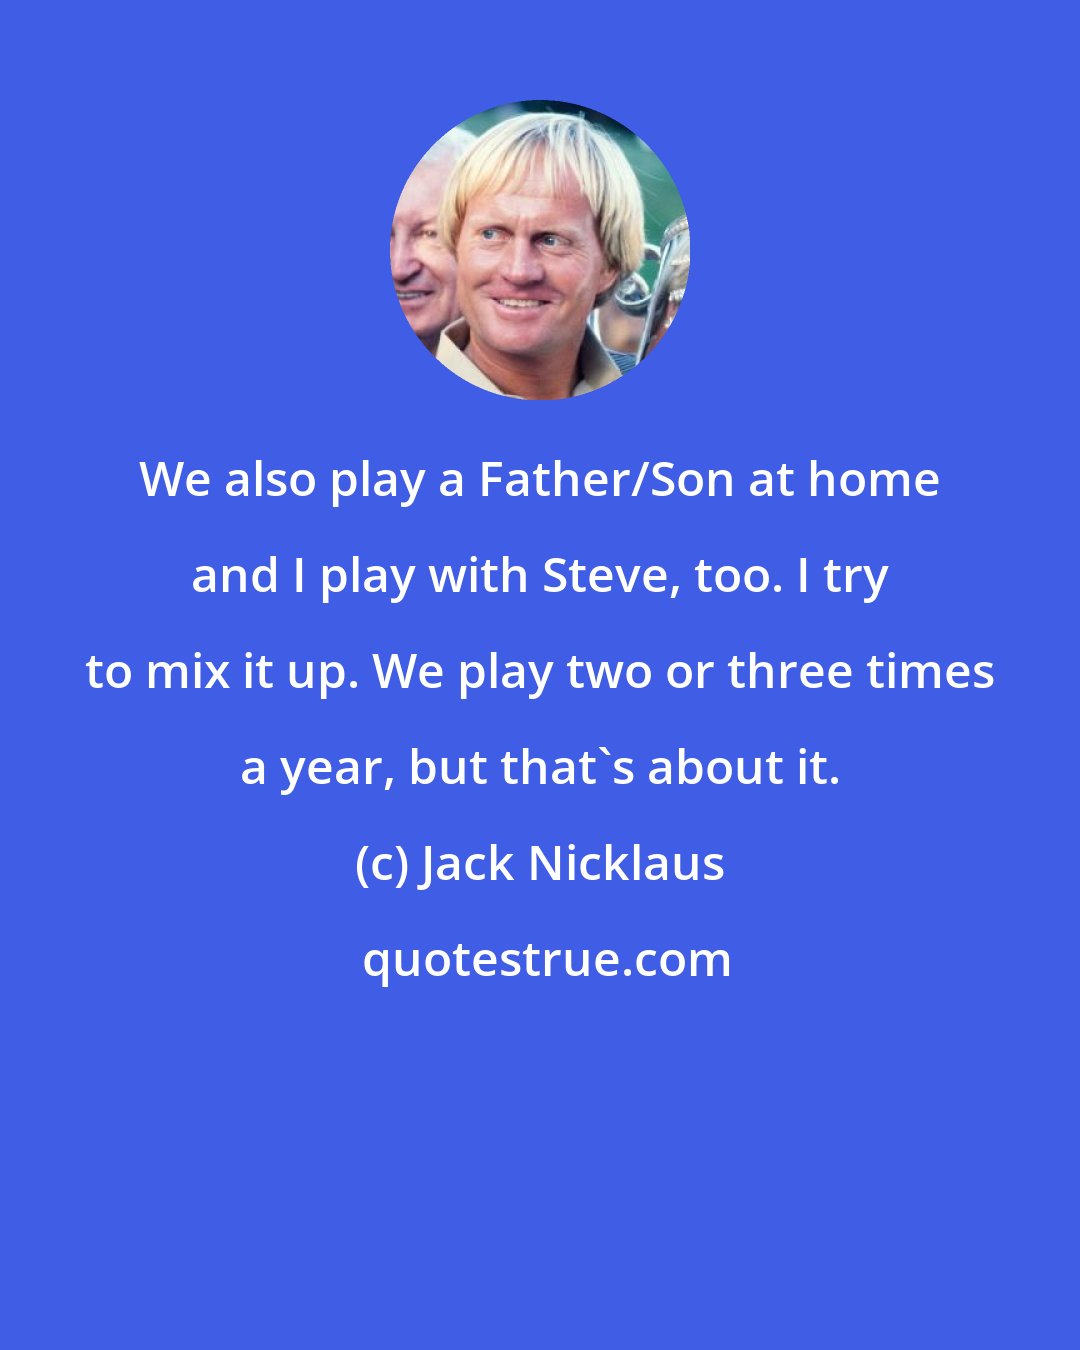 Jack Nicklaus: We also play a Father/Son at home and I play with Steve, too. I try to mix it up. We play two or three times a year, but that's about it.